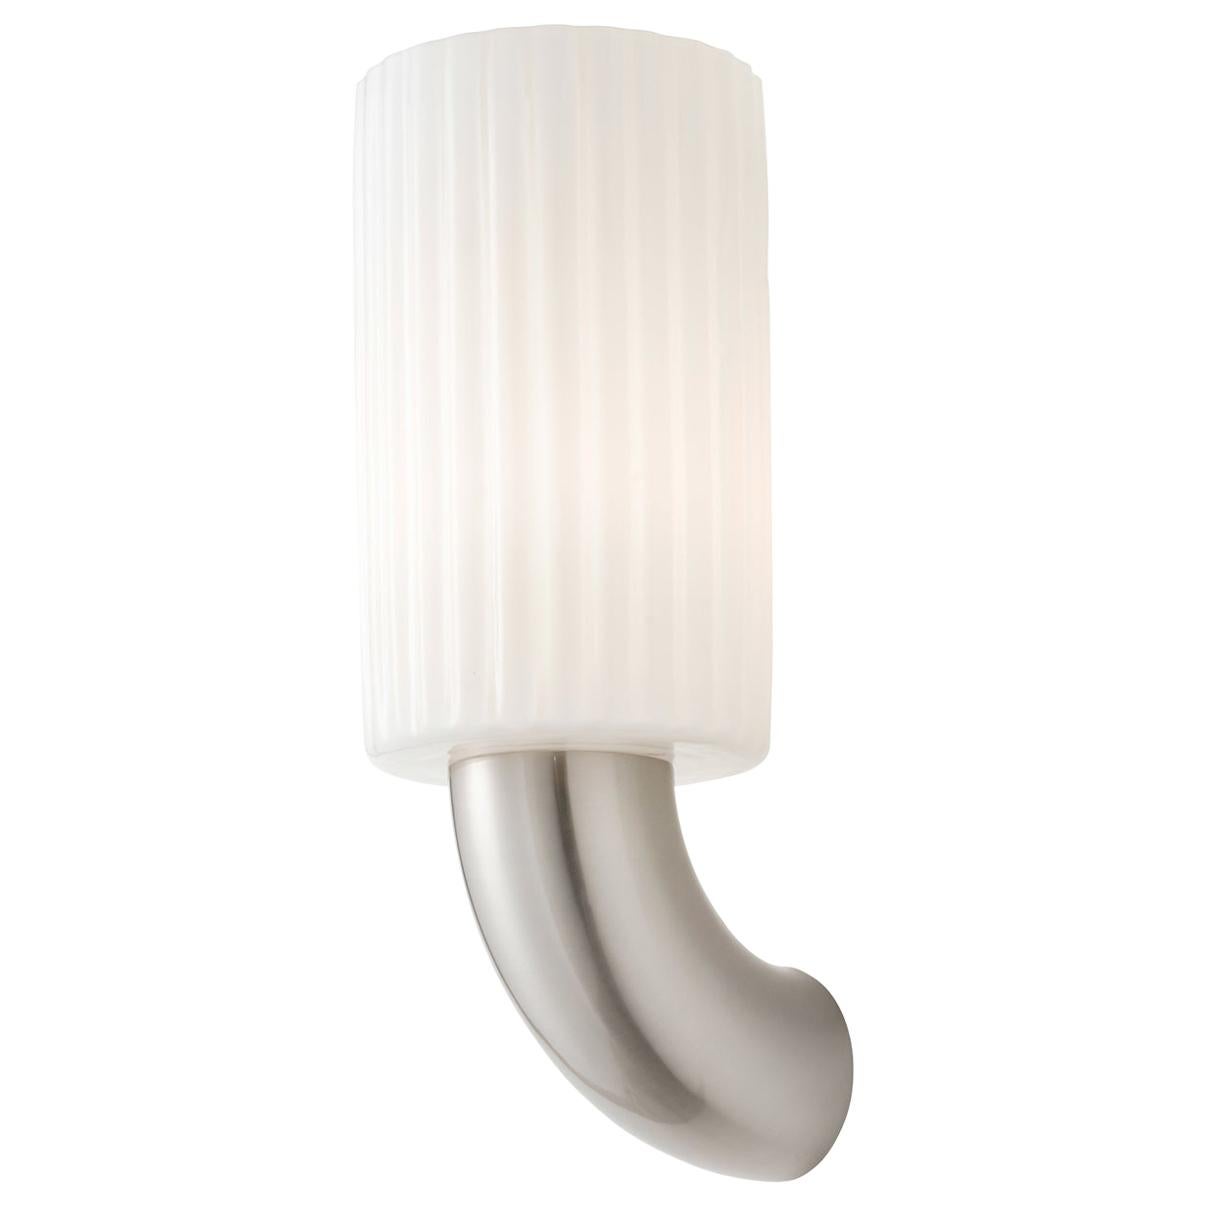 Nickel and White Glass Sconce